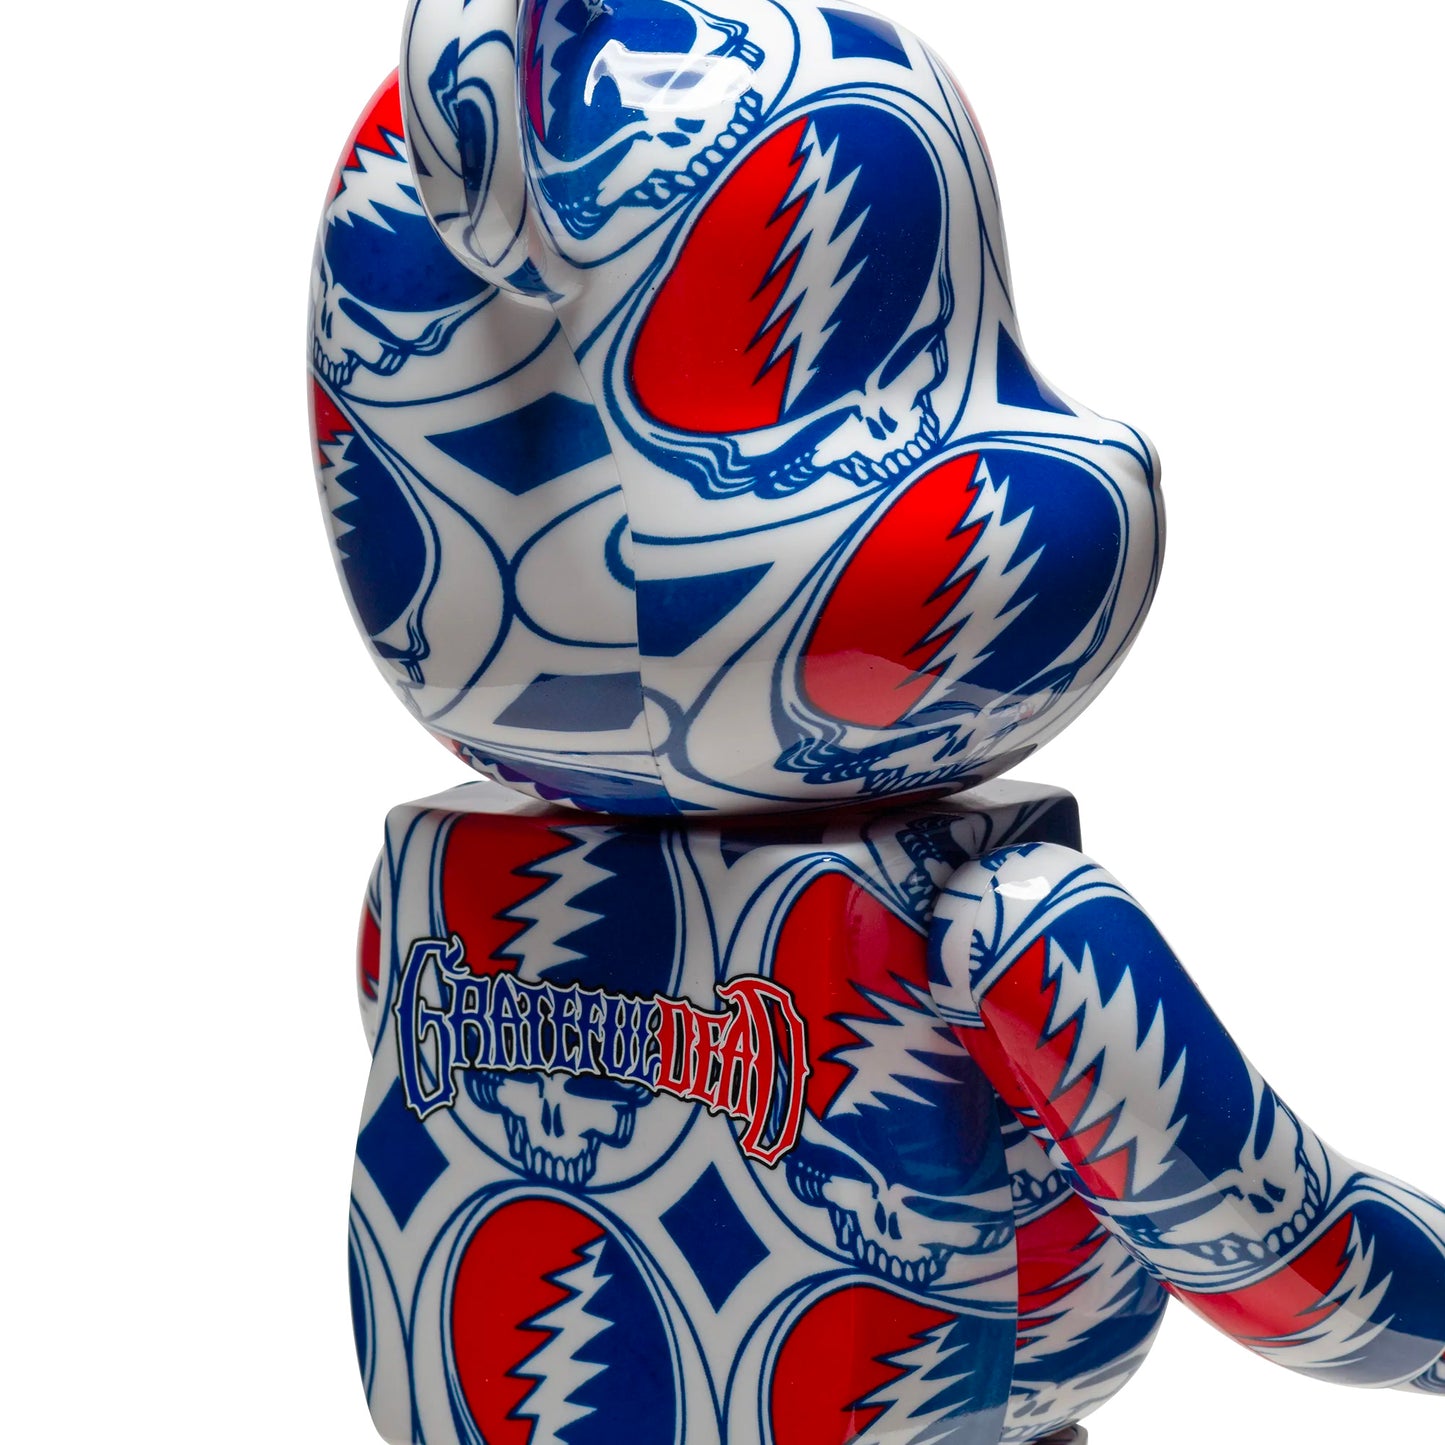 MEDICOM TOY: BE@RBRICK - Grateful Dead Steal Your Face 100% & 400%